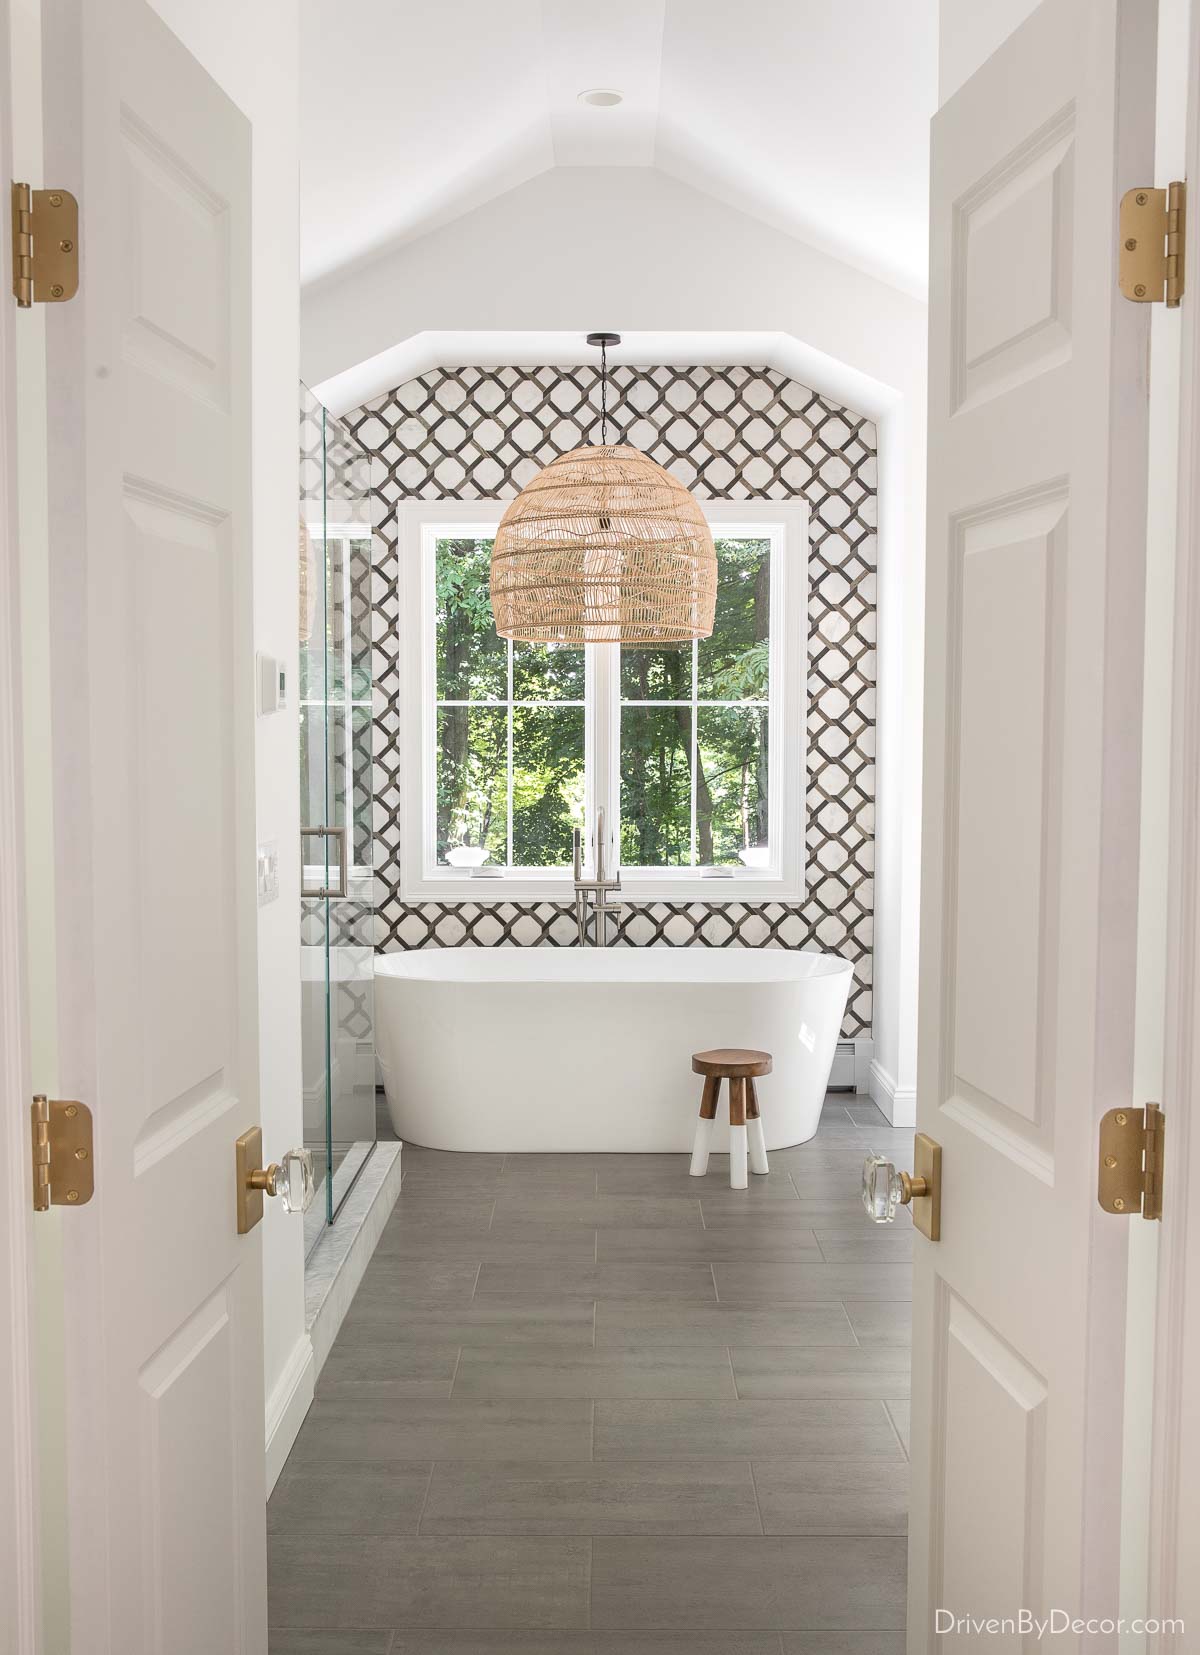 The woven pendant above our bathtub is a statement-maker!